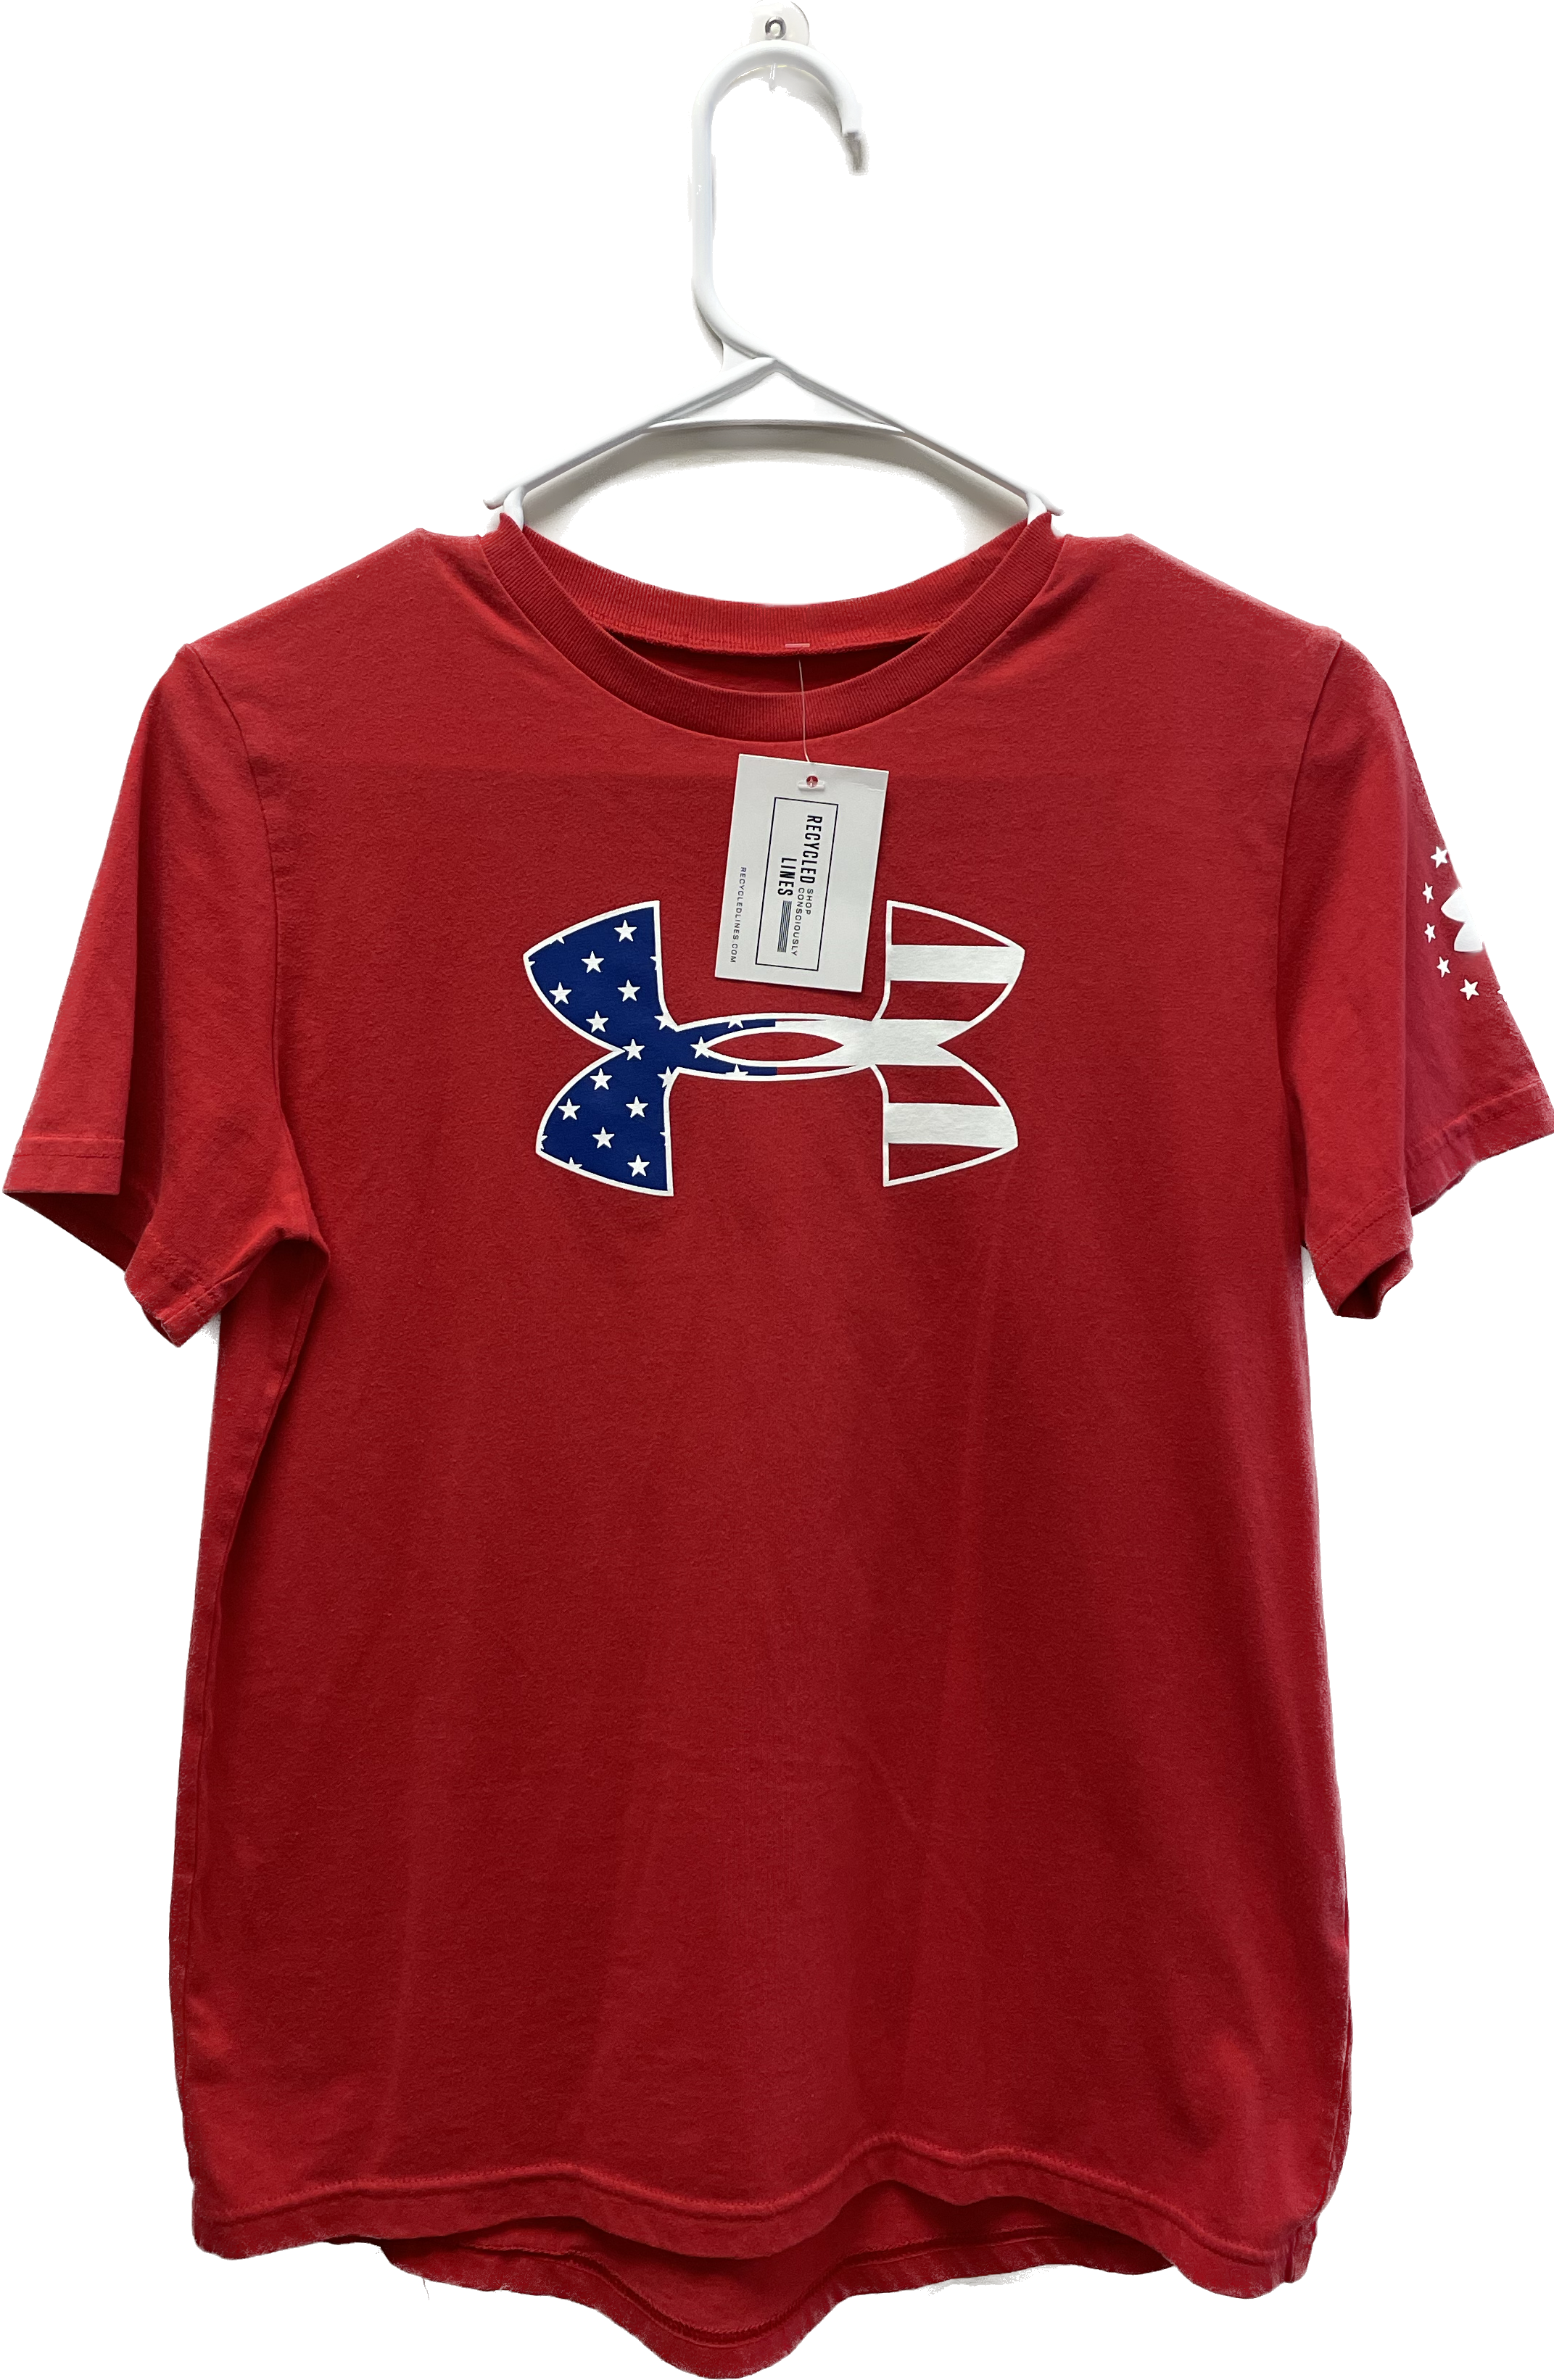 Under Armour American Flag Shirt, Red/White/Blue Boys Size XL